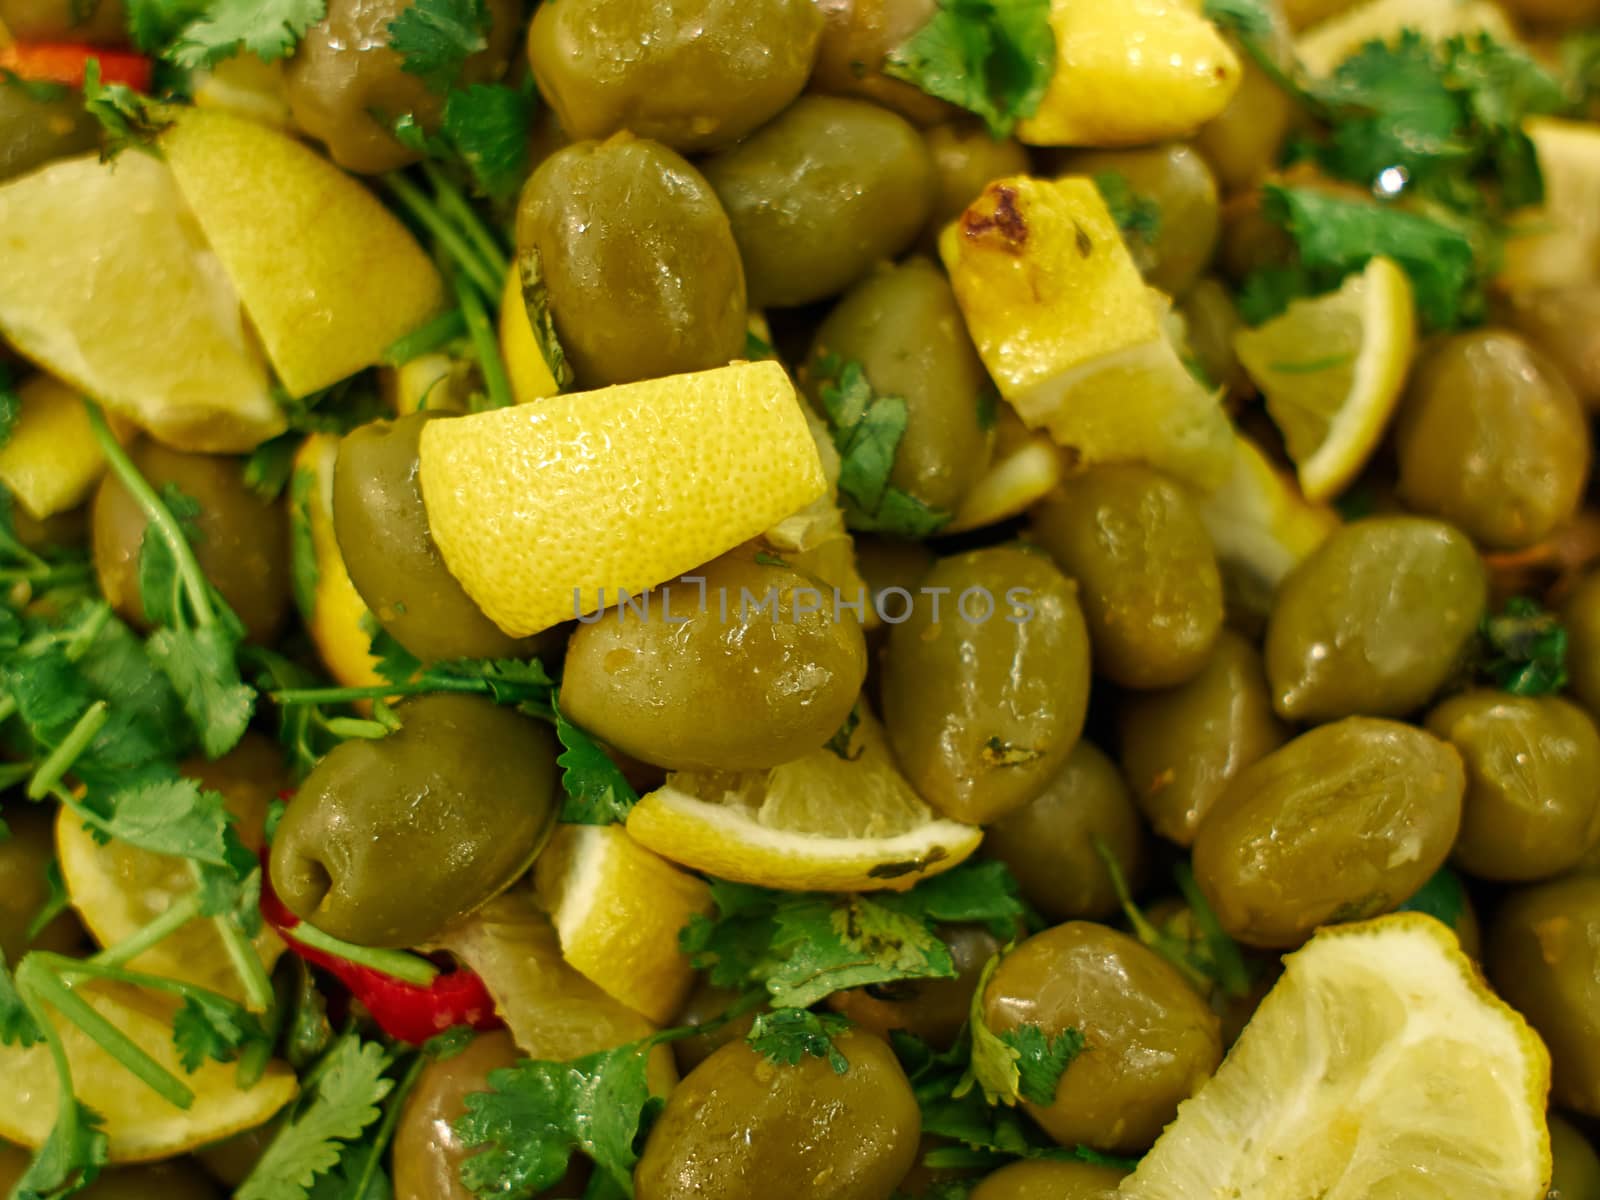 Traditional Mediterranean style olives for sale by Ronyzmbow